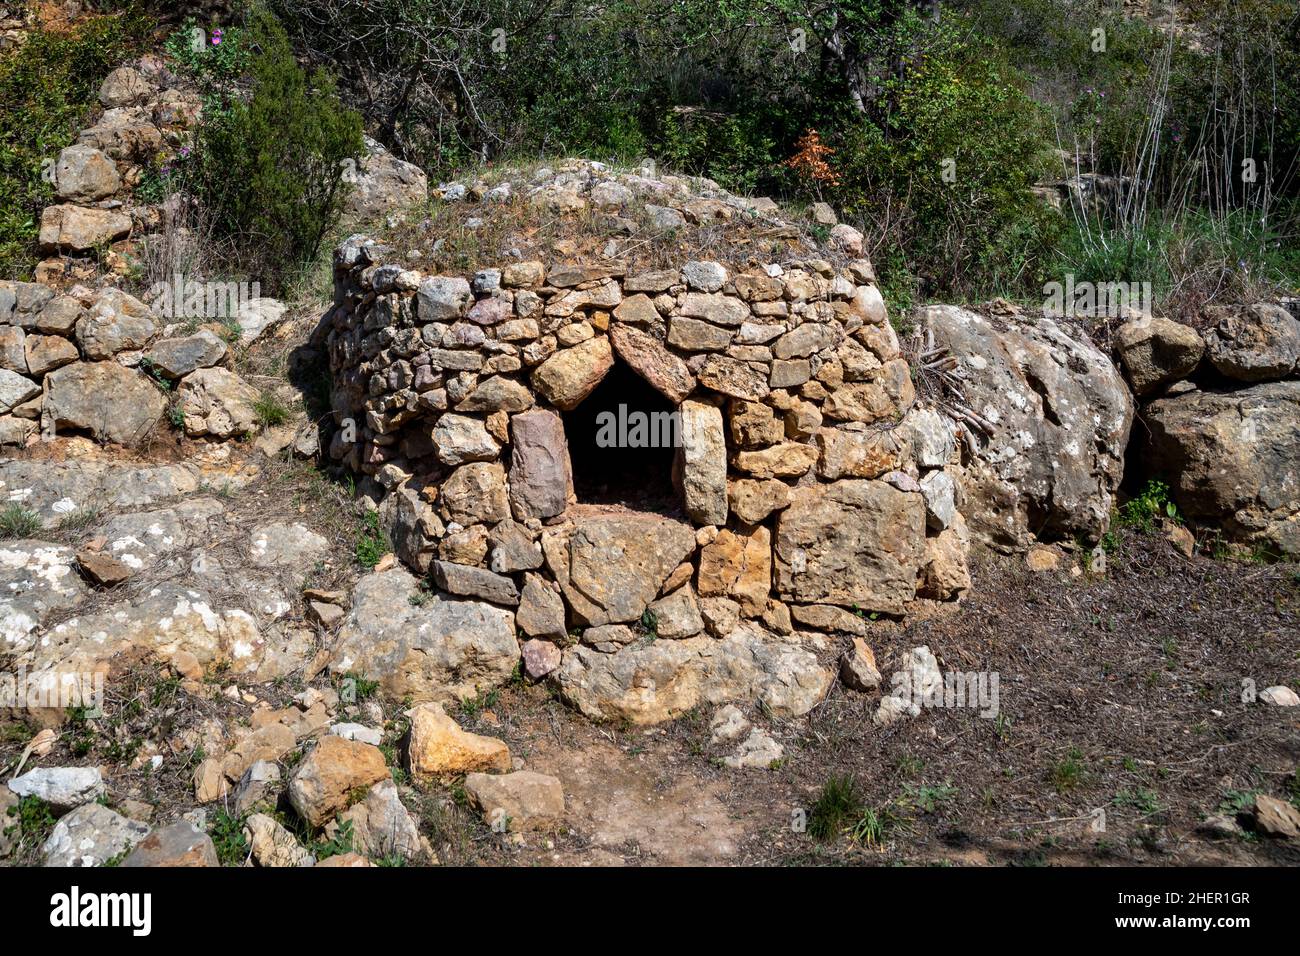 old stone bread oven in the valley of Paderne, Algarve, Portugal Stock Photo